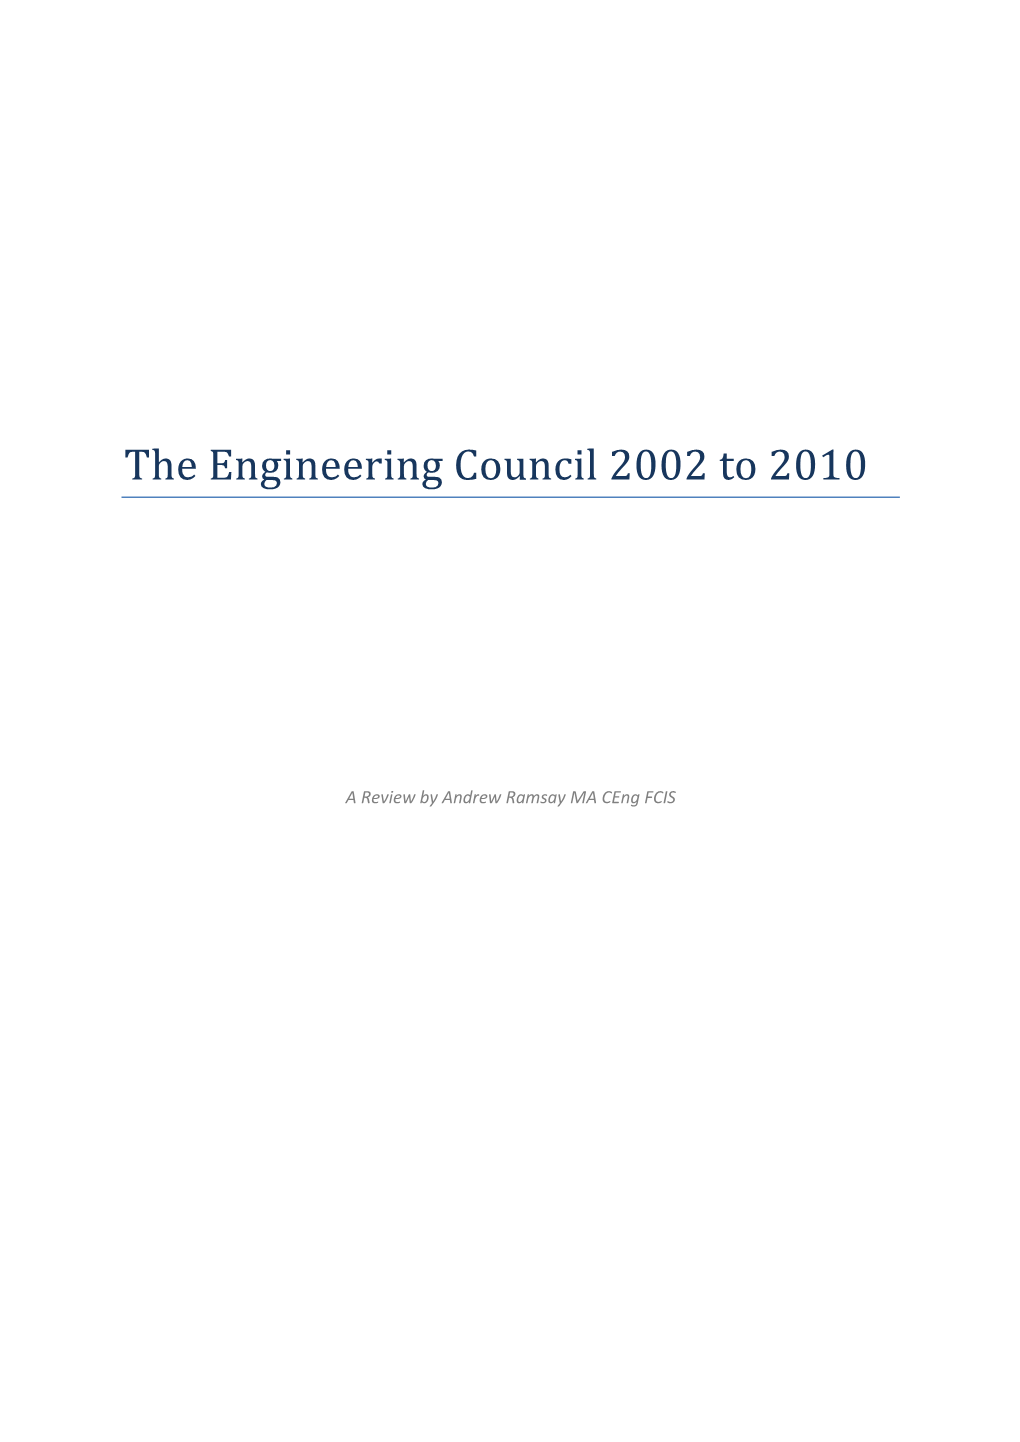 The Engineering Council 2002 to 2010